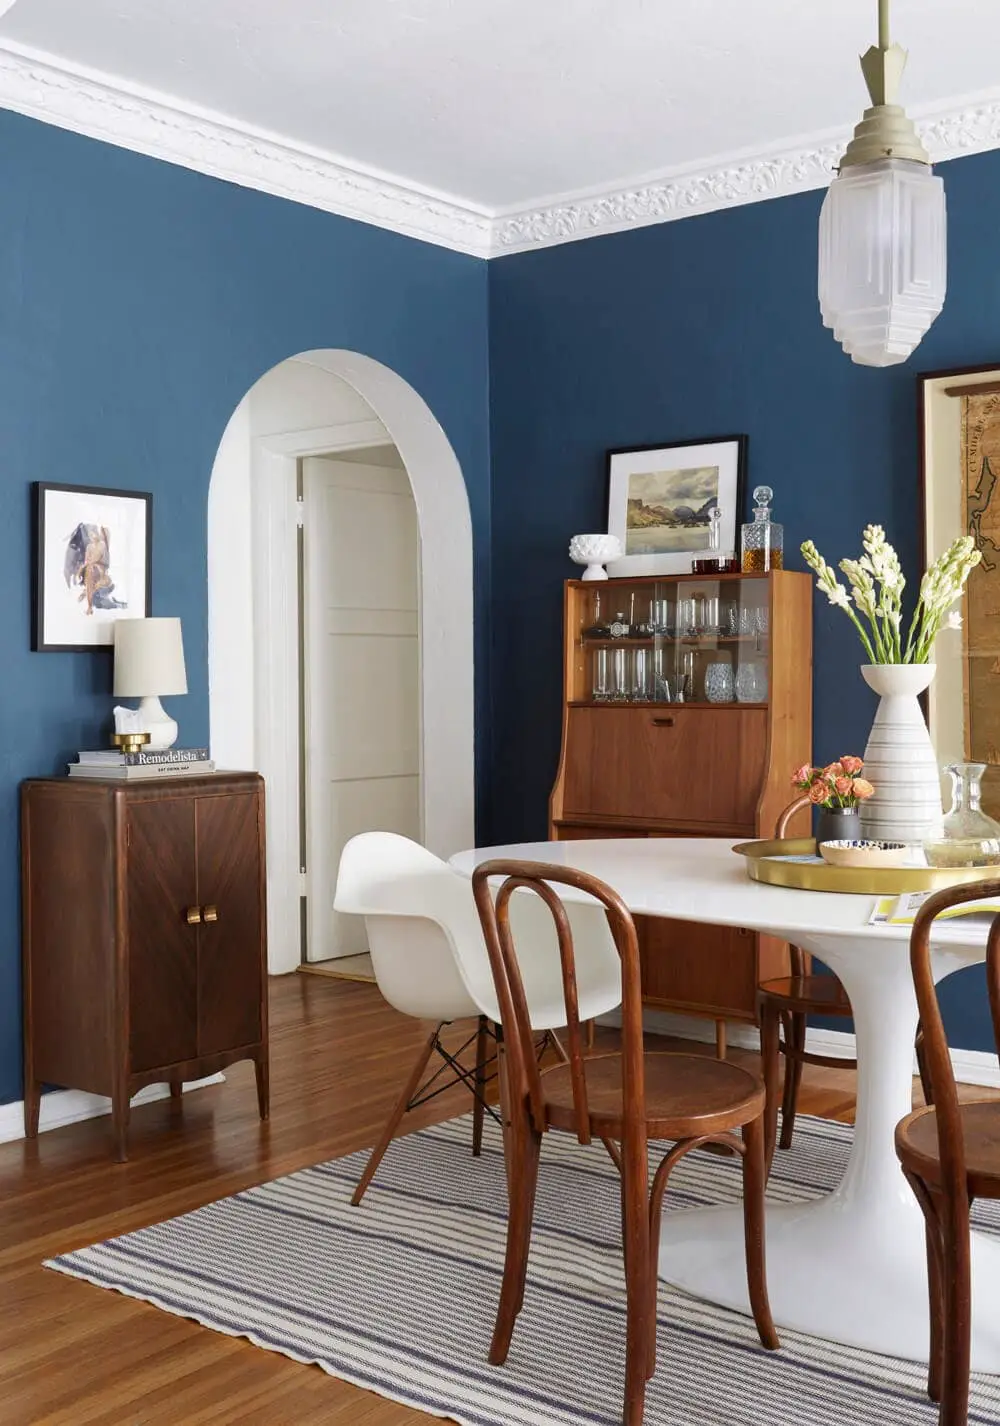 Tye Street Project: Blue Dining Room Plans - Thou Swell